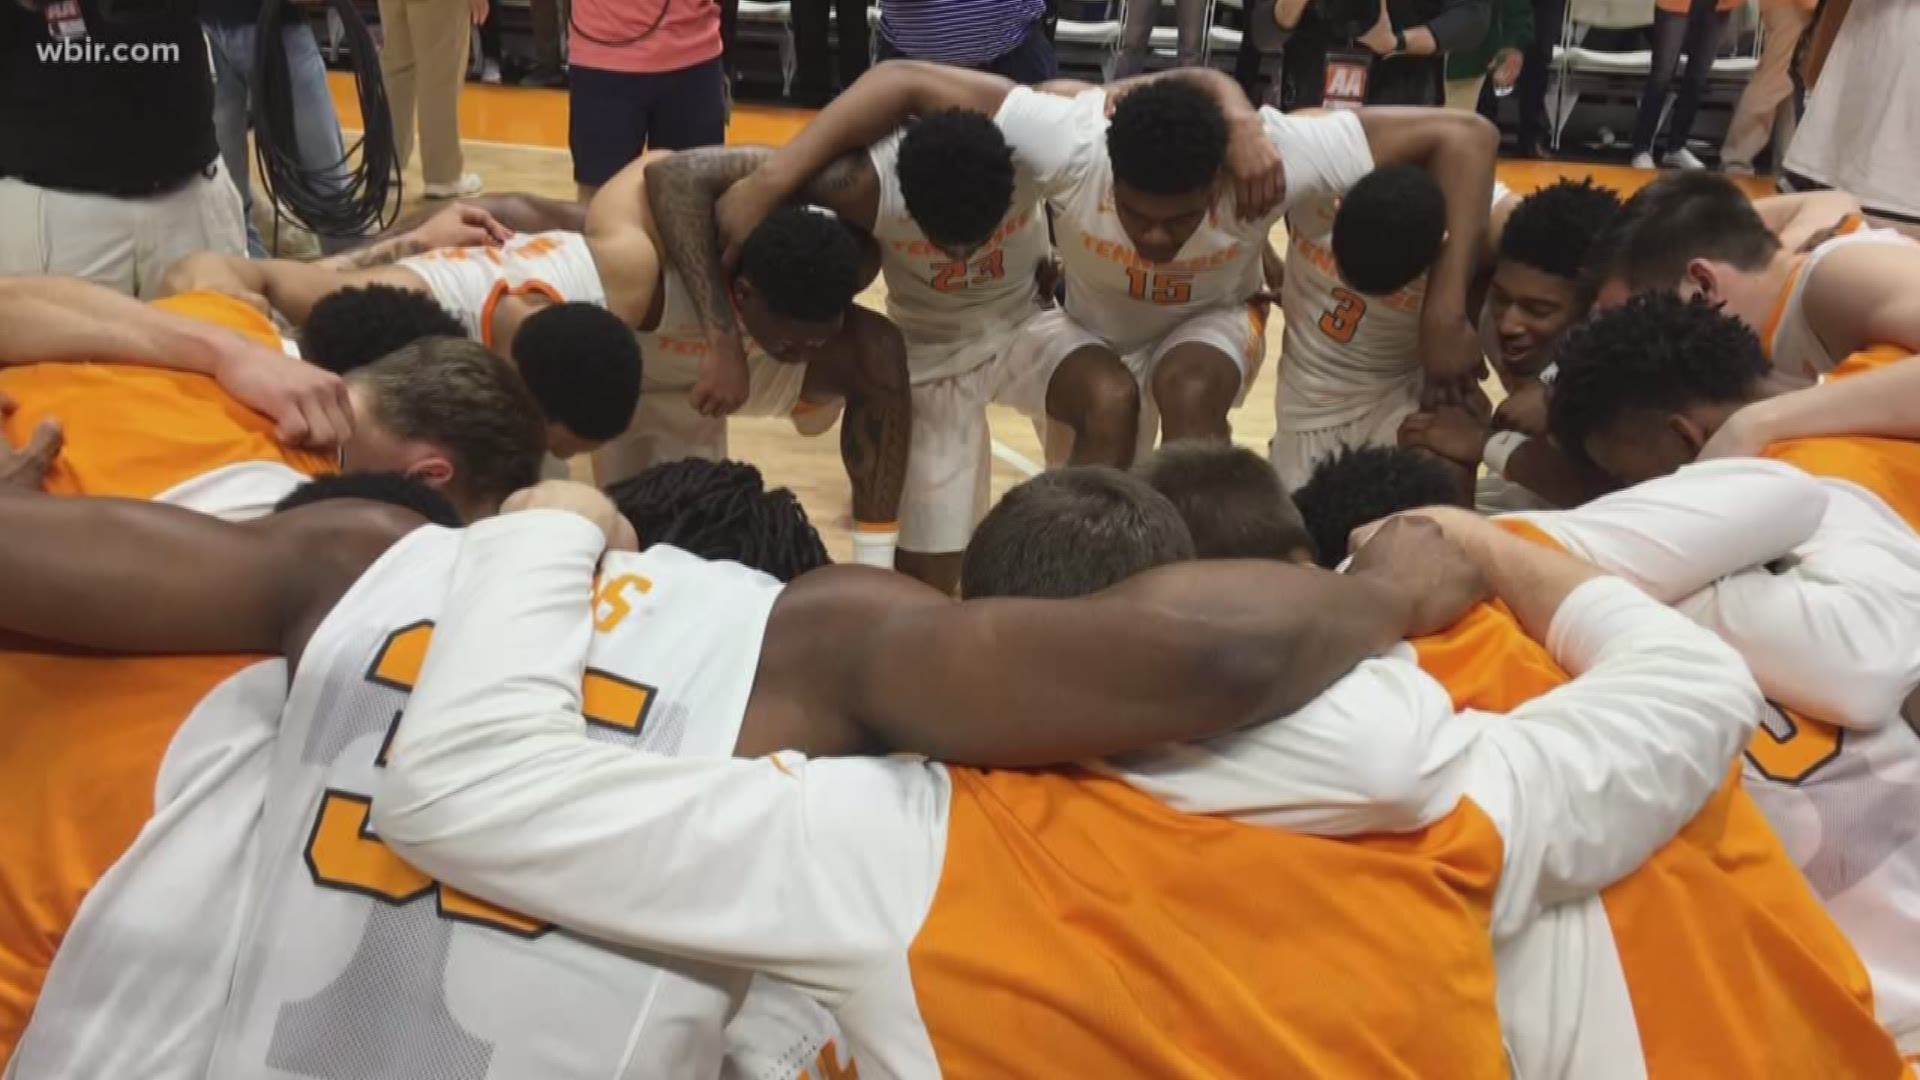 What makes this Vol Basketball team such a tight group? They're loving all the success in the spotlight, but they're also thriving in their connection off the court.